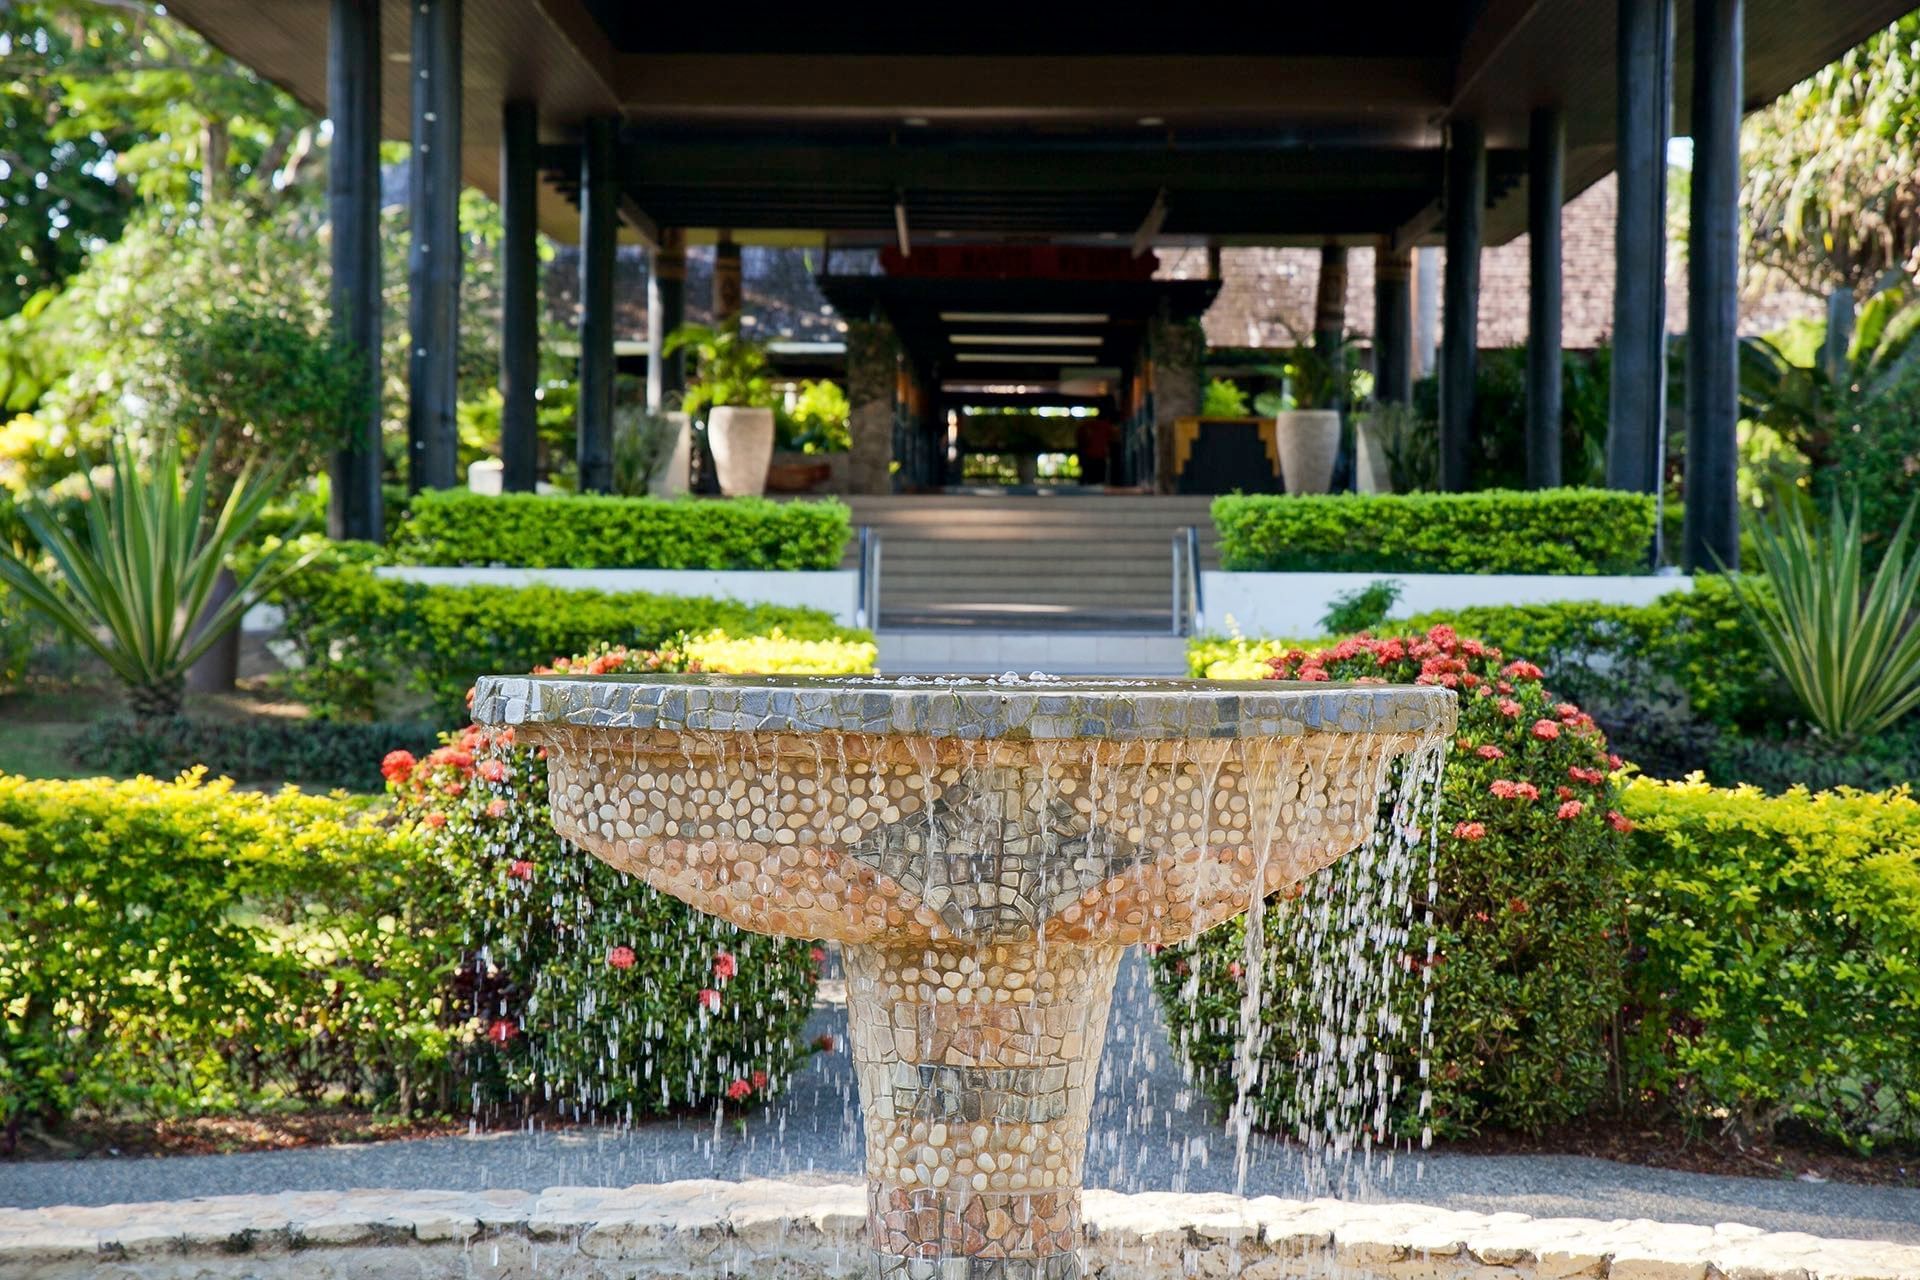 View of a water Fountain by the entrance at The Naviti Resort